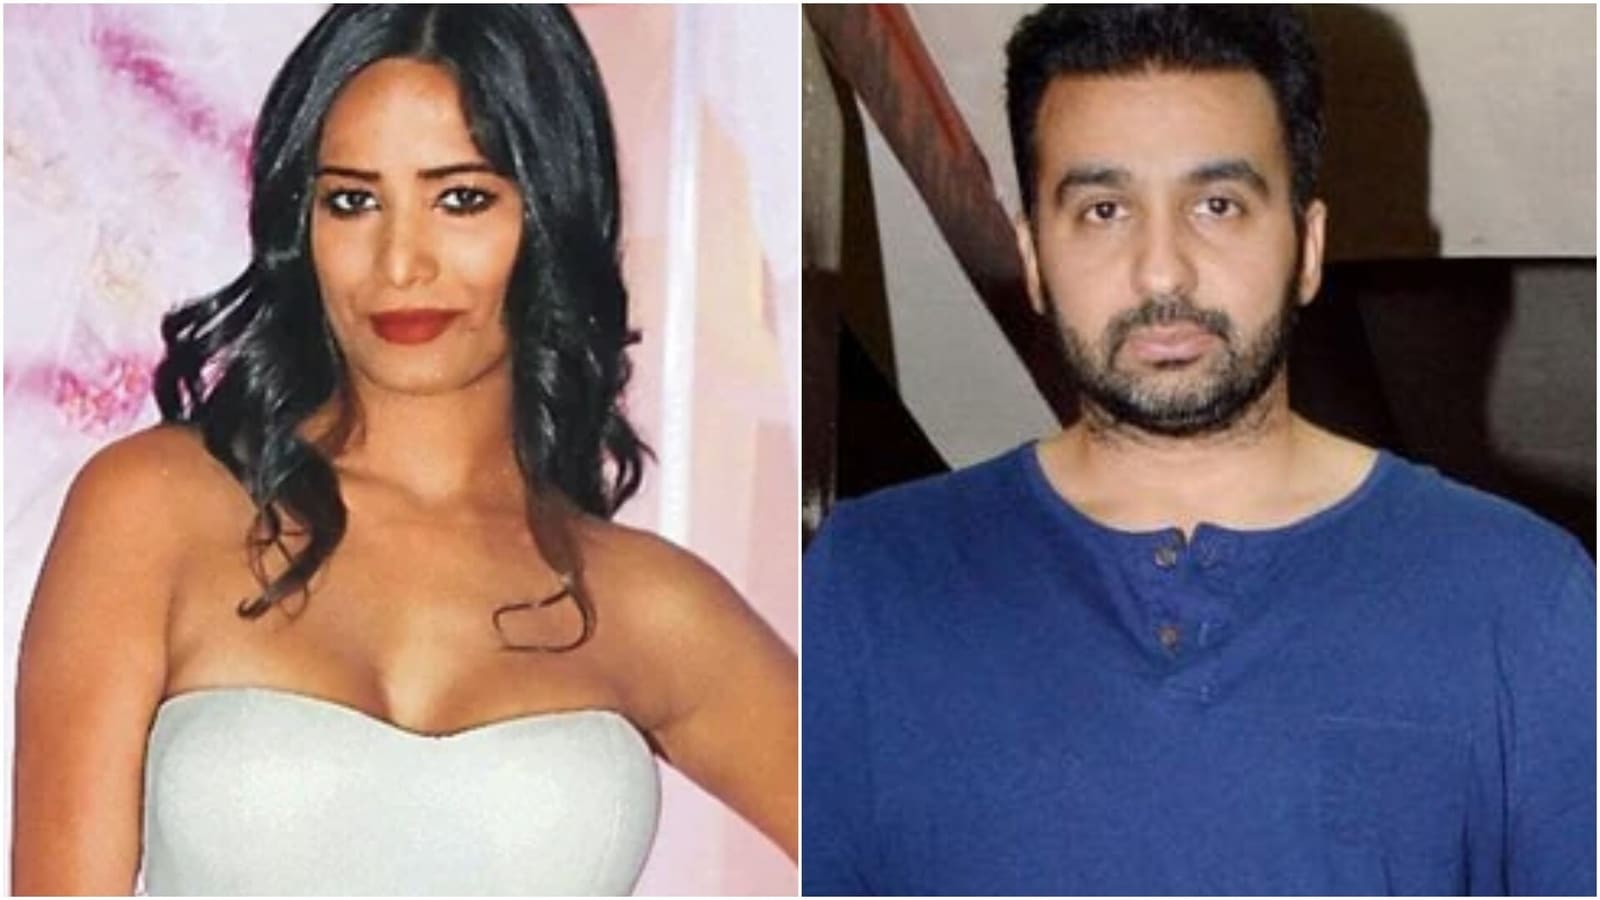 Poonamsexvideo - Poonam Pandey says working with Raj Kundra was the 'biggest mistake' of her  life: 'These guys cheat people' | Bollywood - Hindustan Times